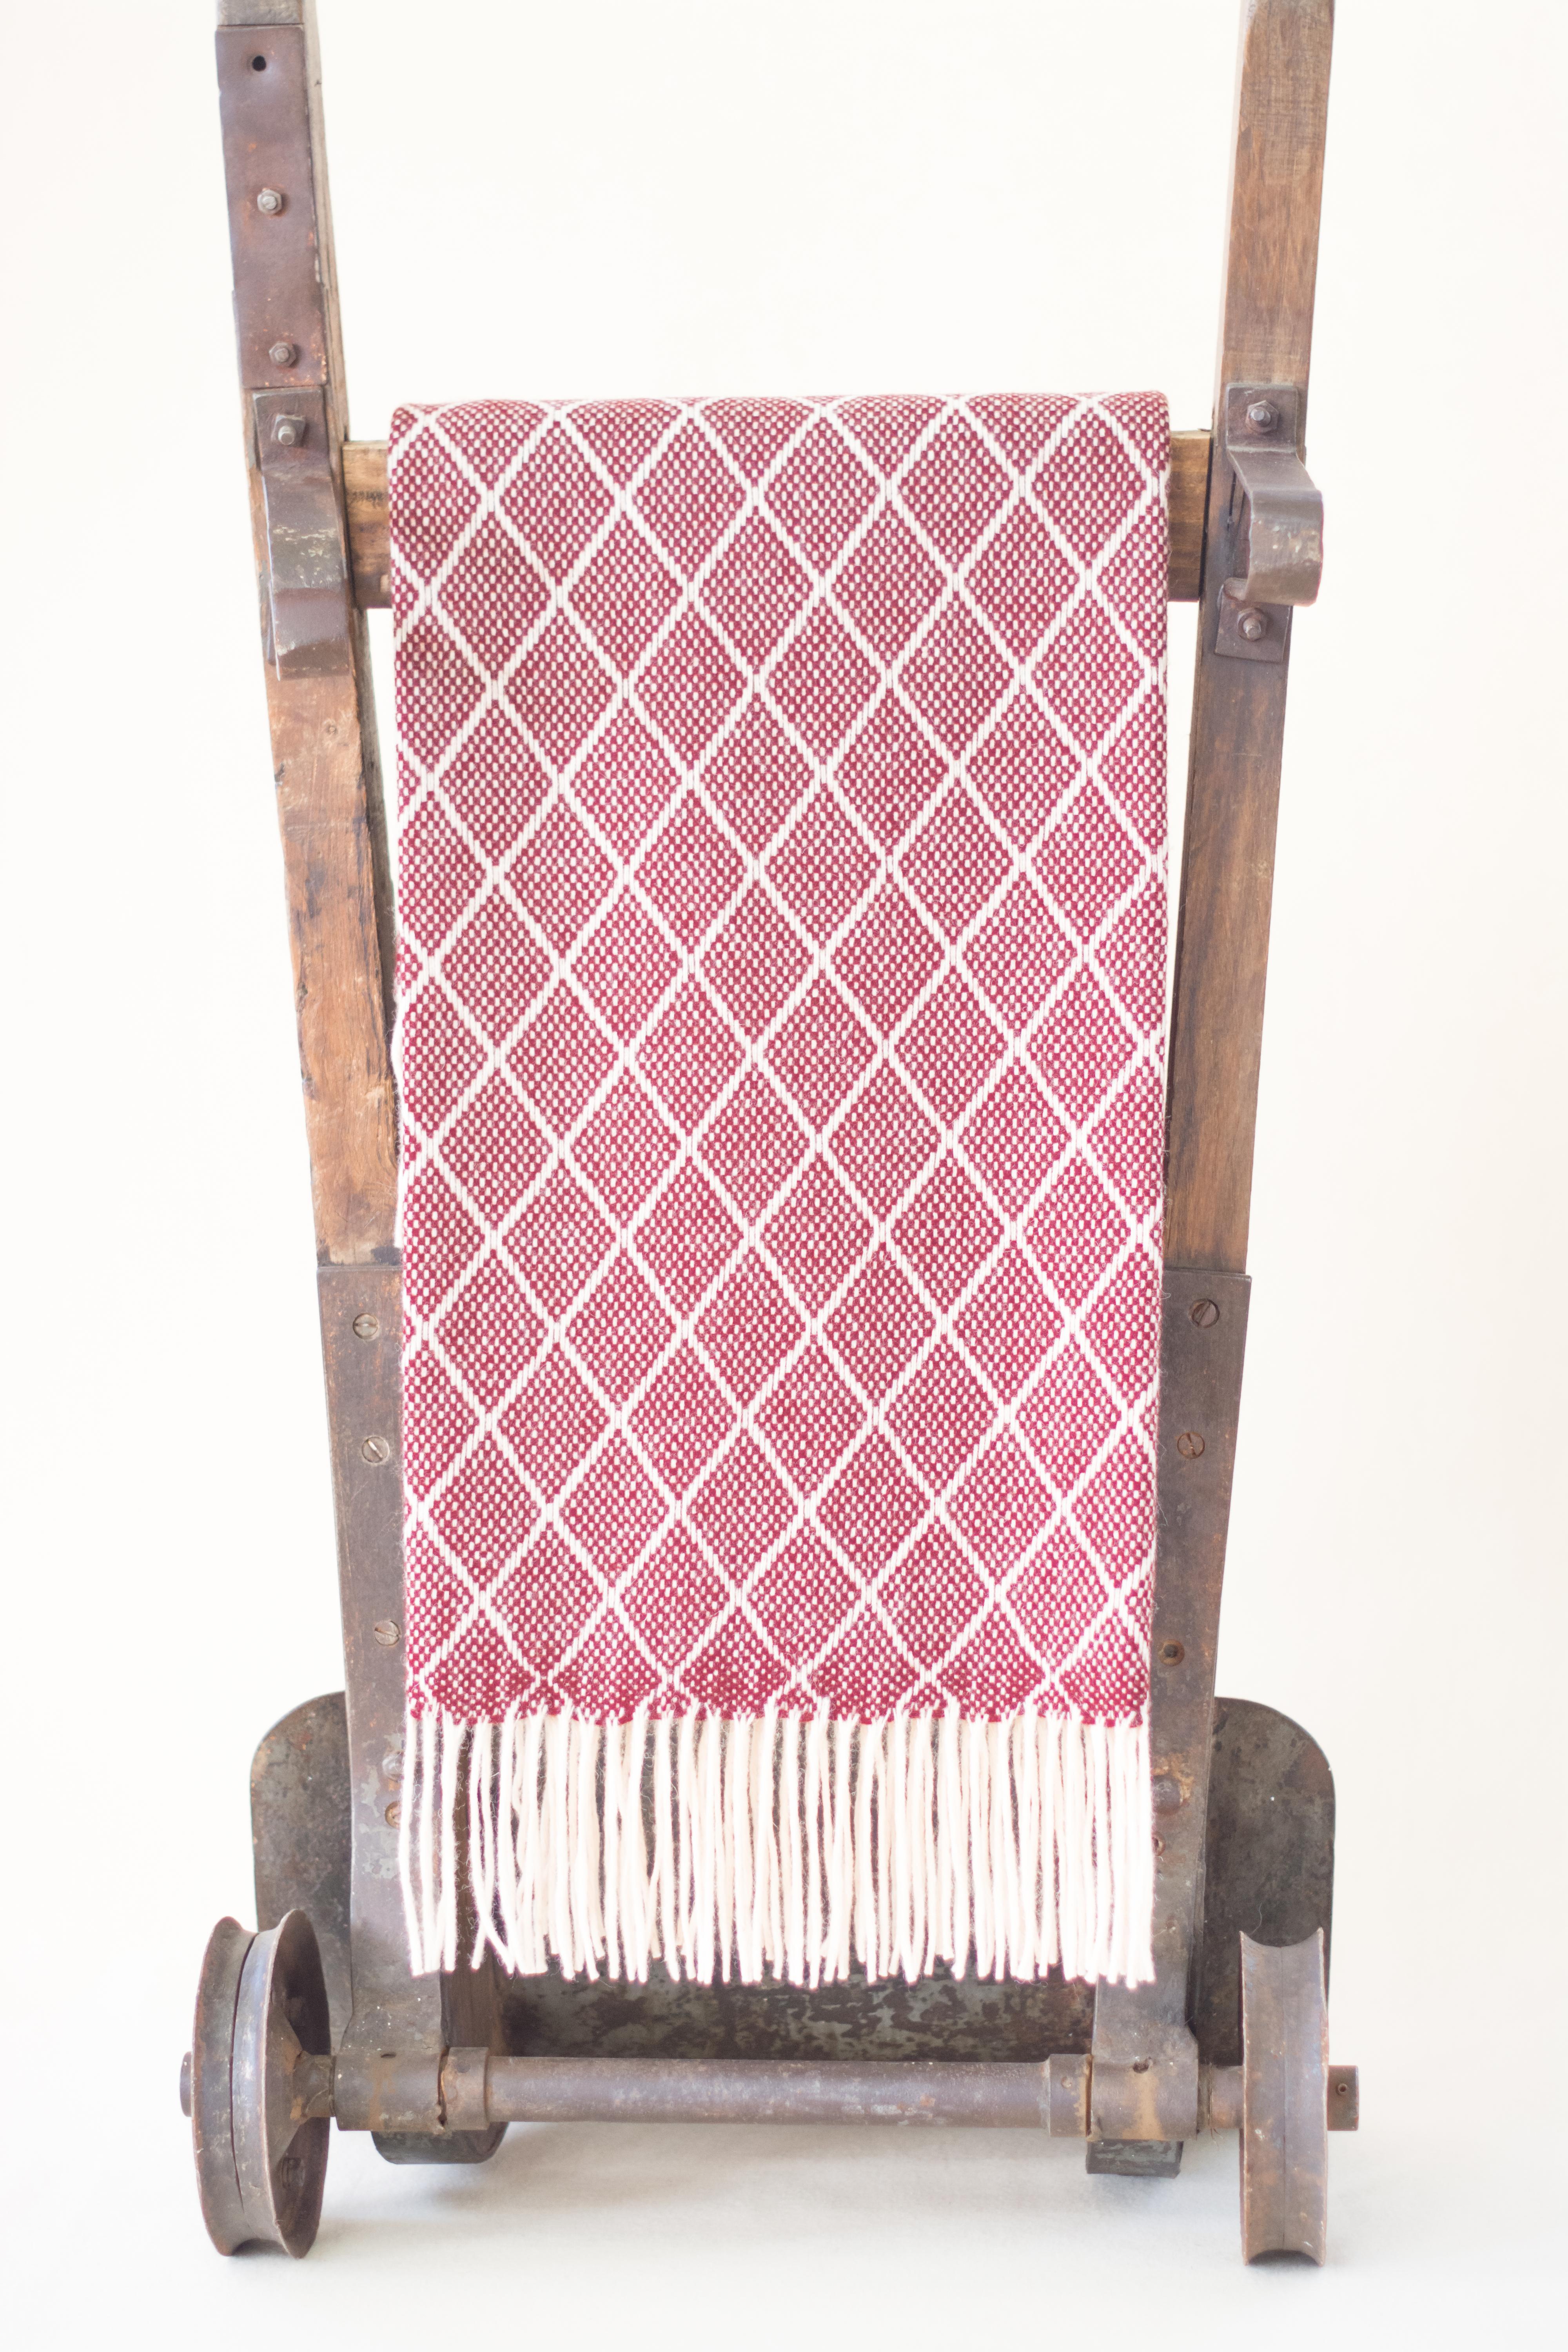 The Otilia Bordeaux color diamond design pattern blanket/throw has been created by an incredible and unique family owned weaving and textile company in Portugal. This company impressed us so much by their commitment to working with the environment,